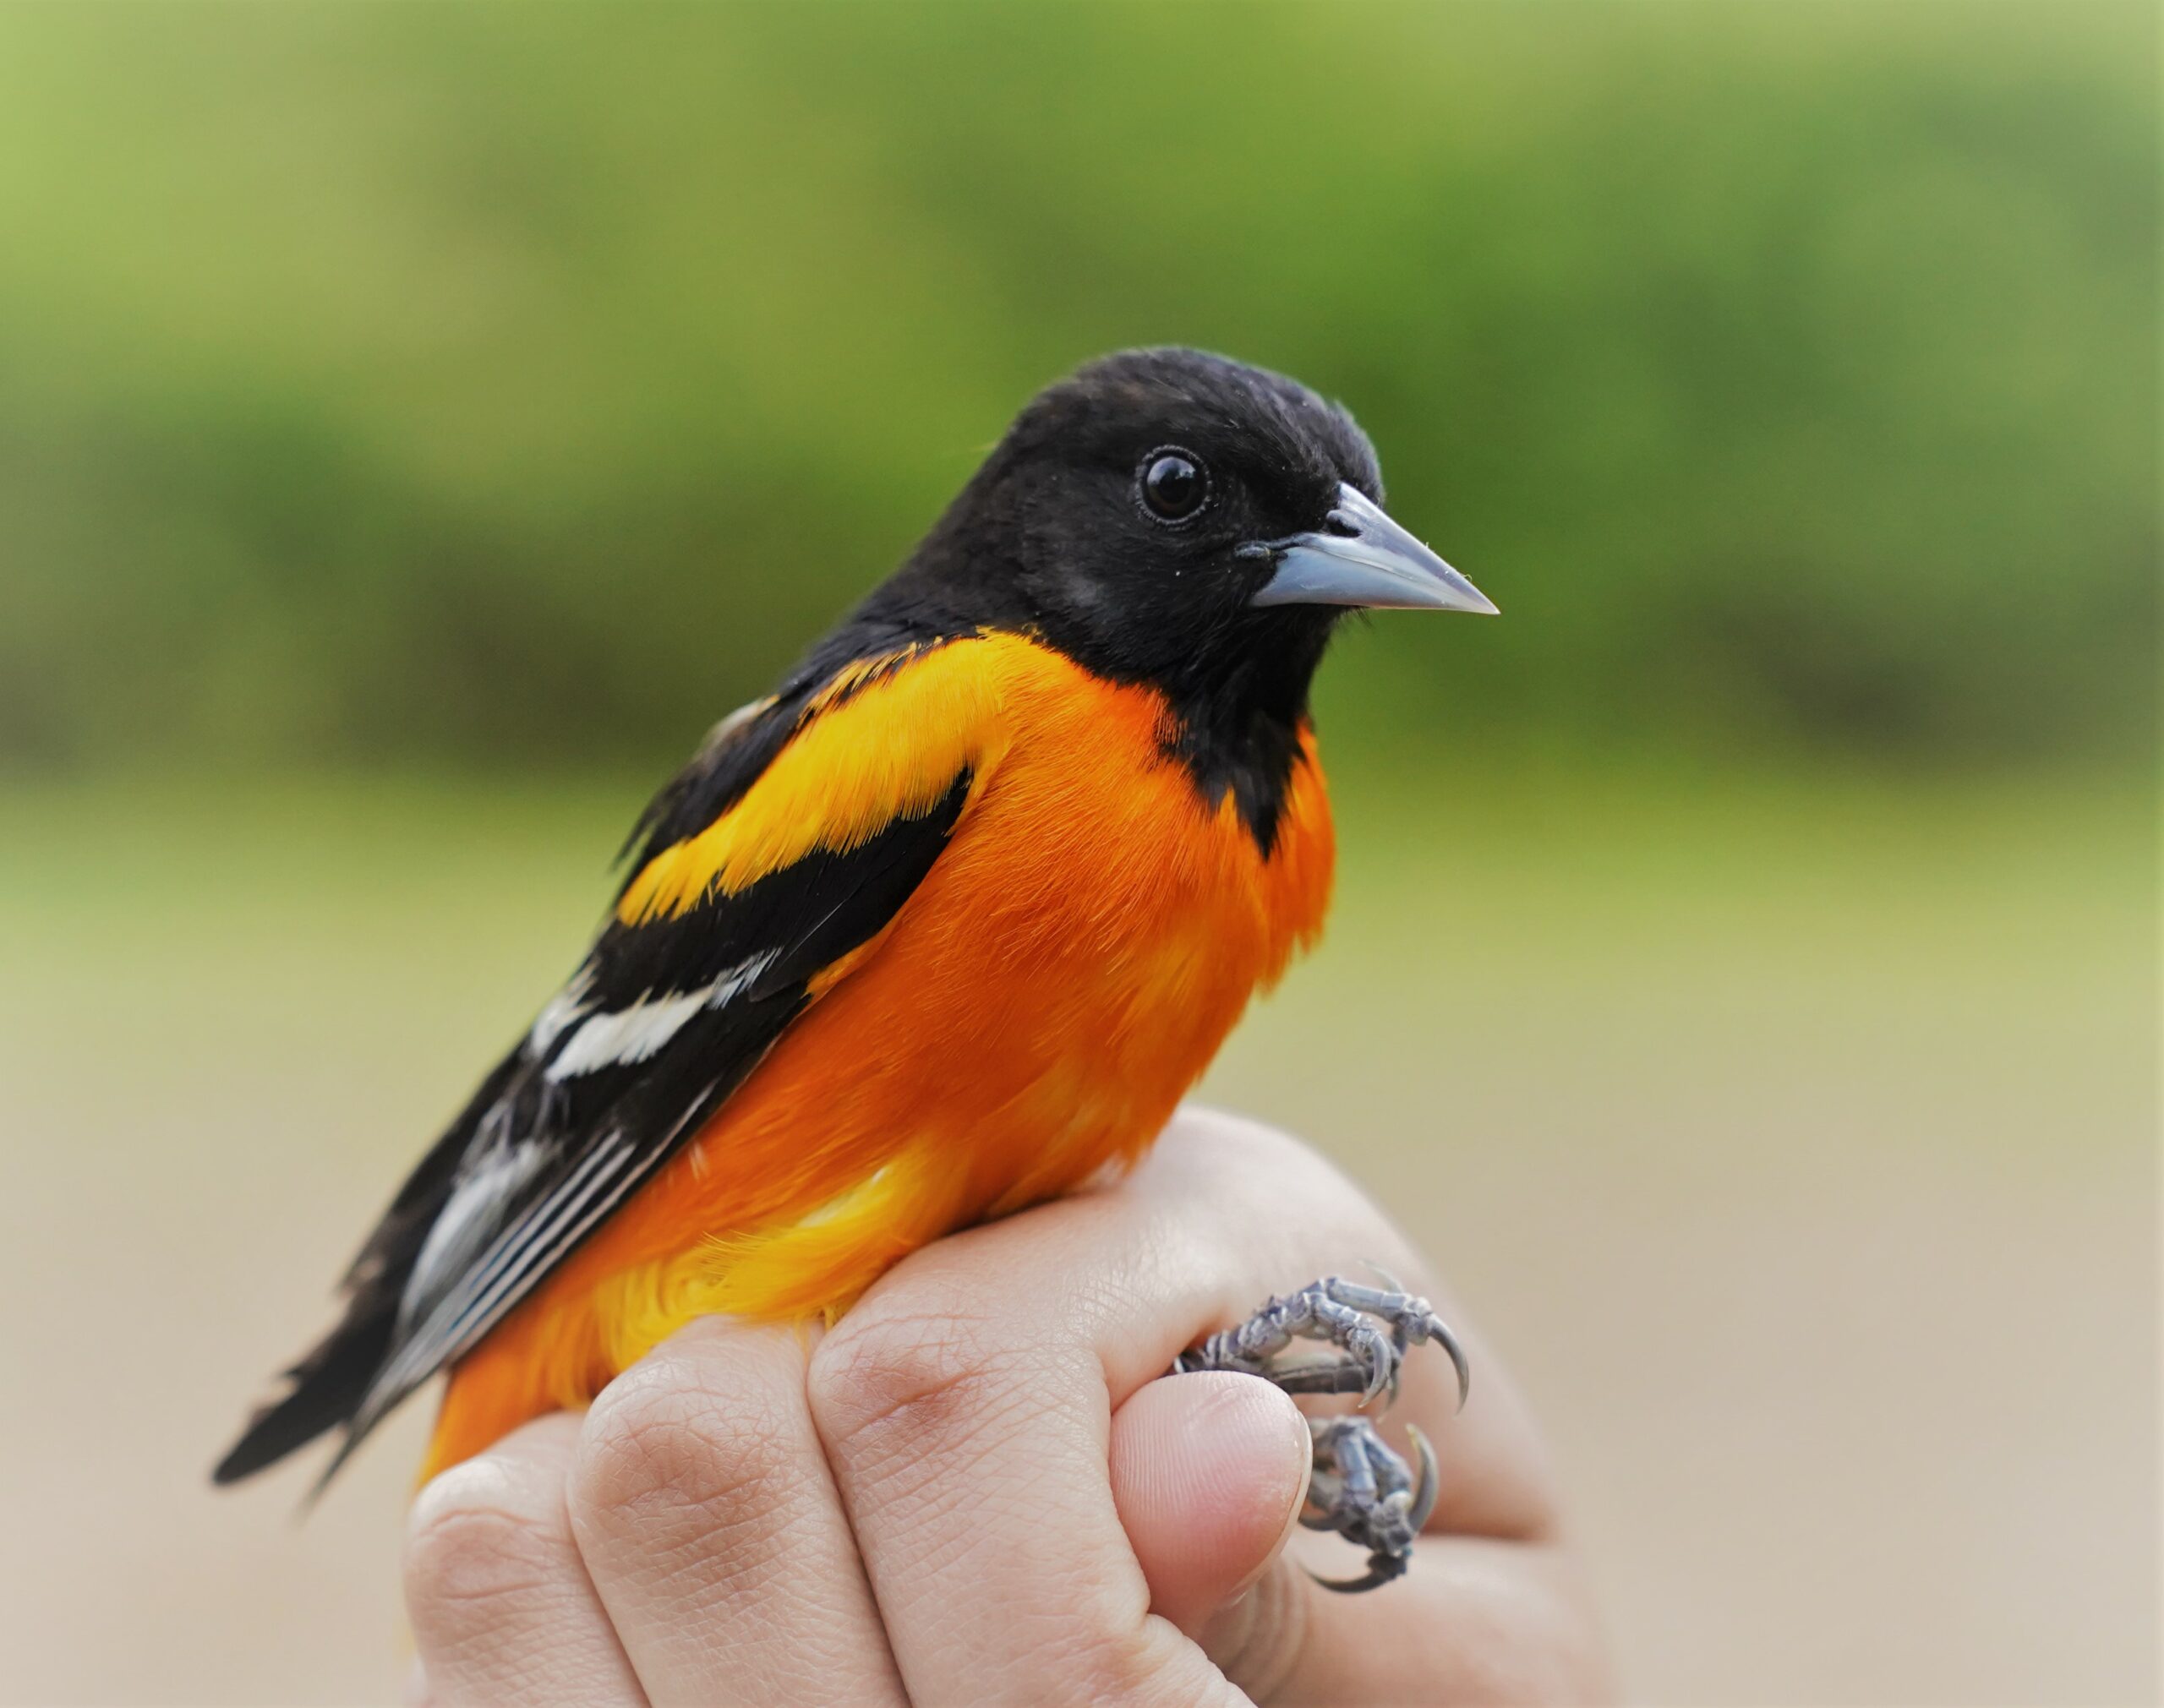 Most coffee production results in large-scale habitat destruction and has countless global impacts including the decline of migratory birds. You have the power to change that.  Baltimore Oriole by Aaron Coolman.